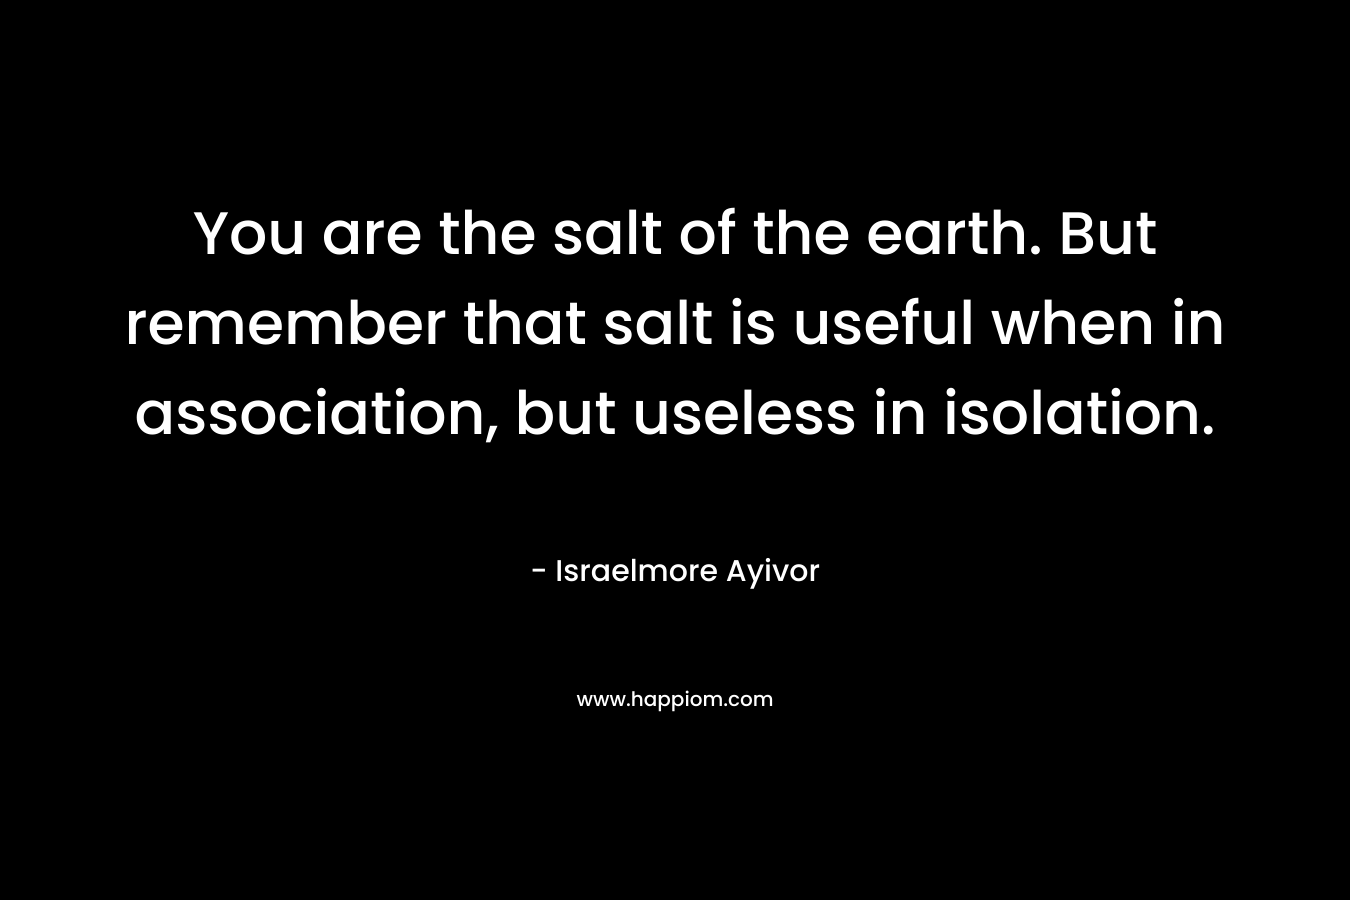 You are the salt of the earth. But remember that salt is useful when in association, but useless in isolation. – Israelmore Ayivor